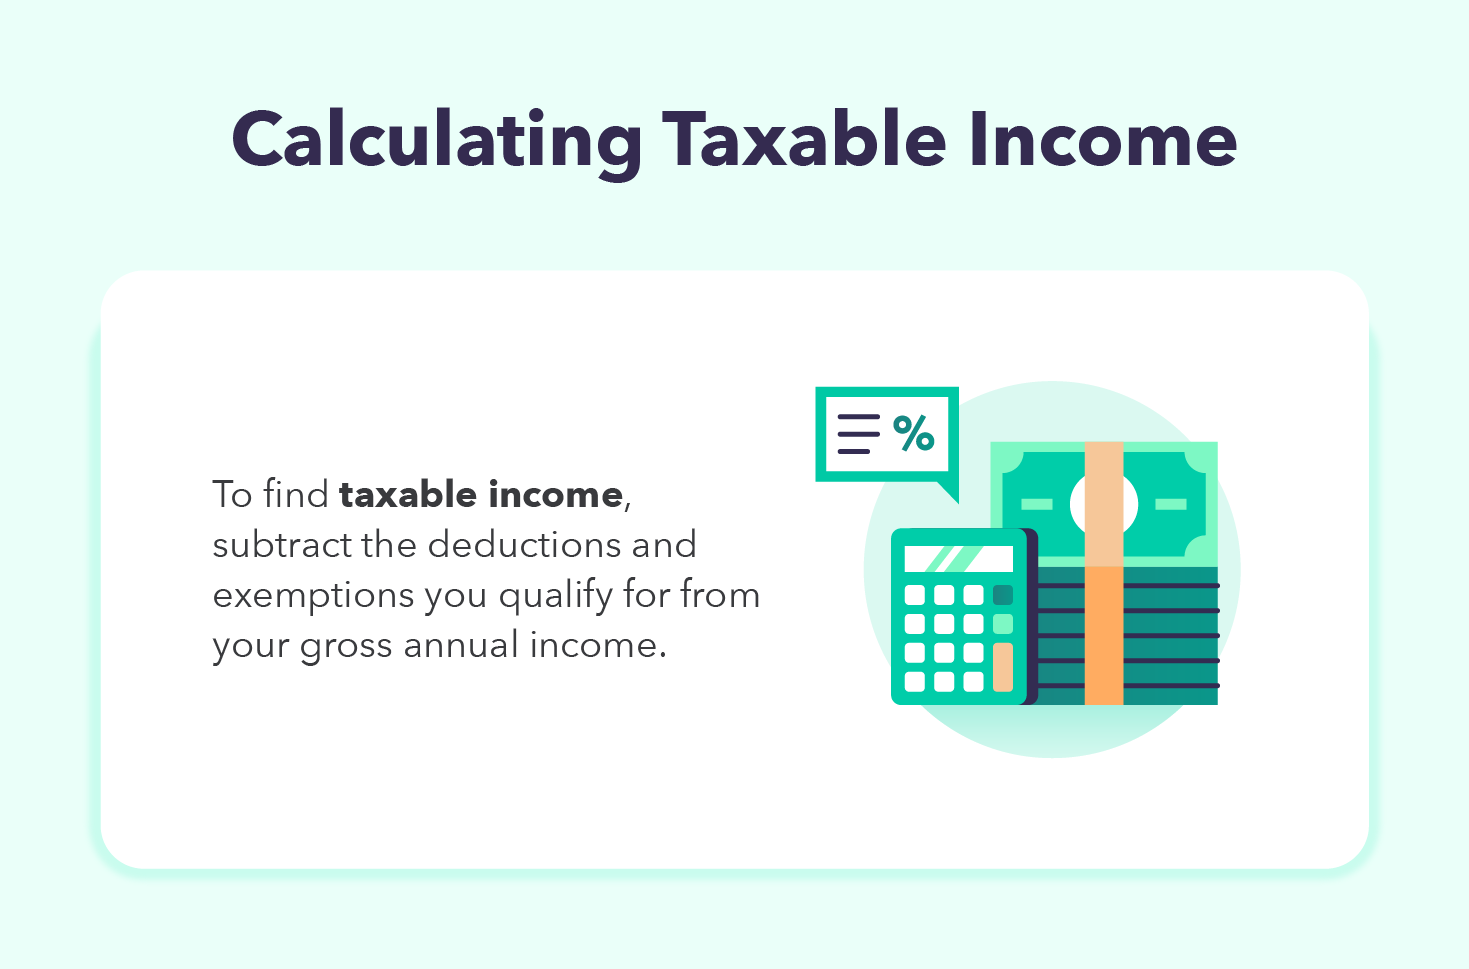 To find taxable income, subtract the deductions and exemptions you qualify for from your gross annual income. 